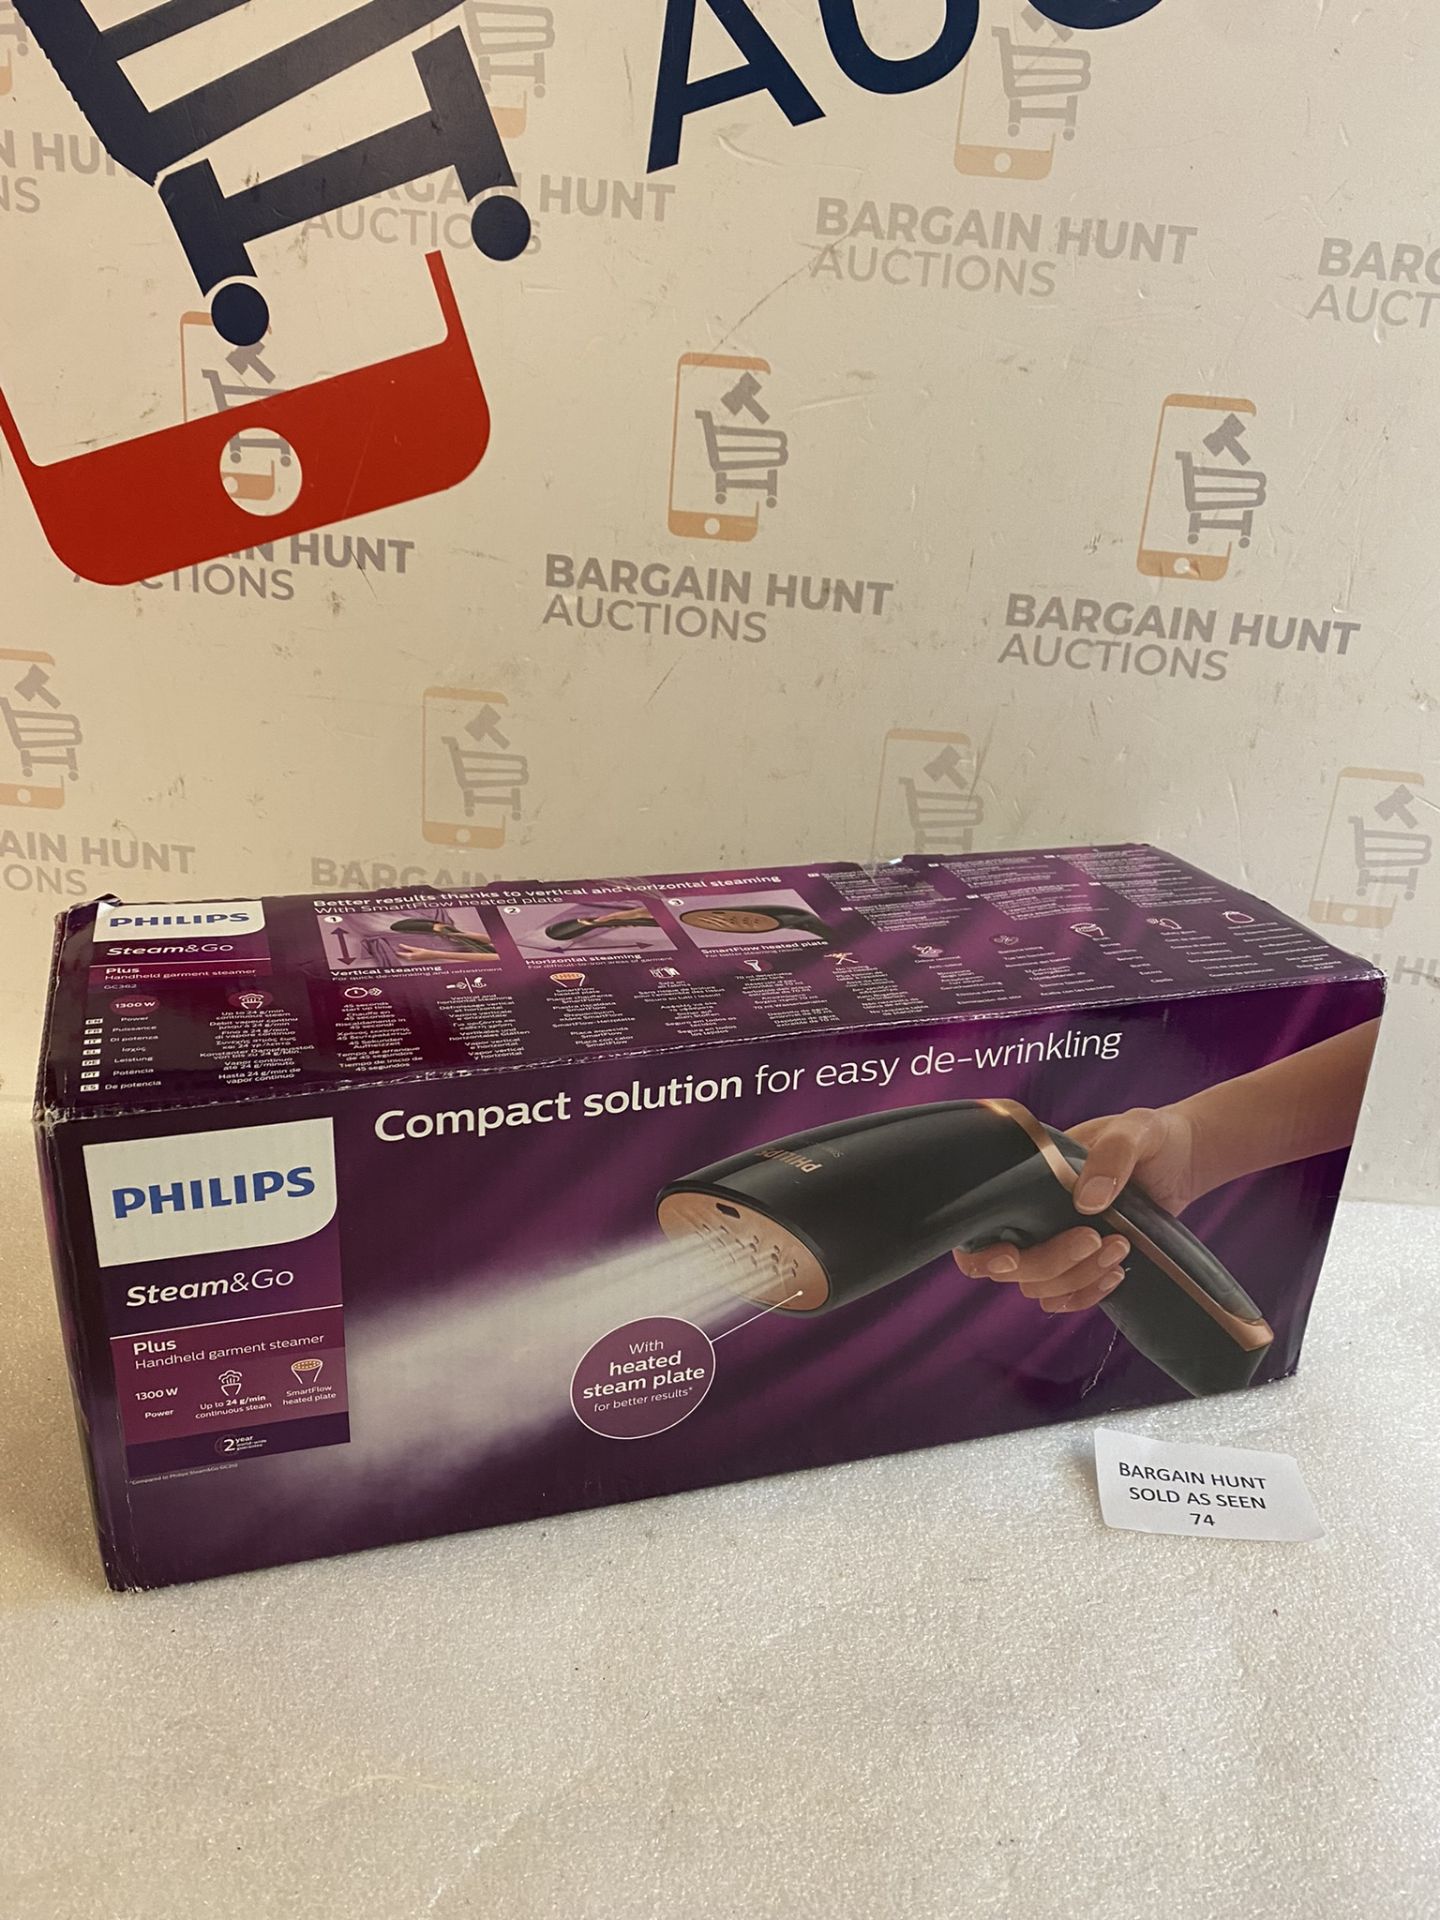 Philips Steam and Go Plus Handheld Garment Steamer RRP £74.99